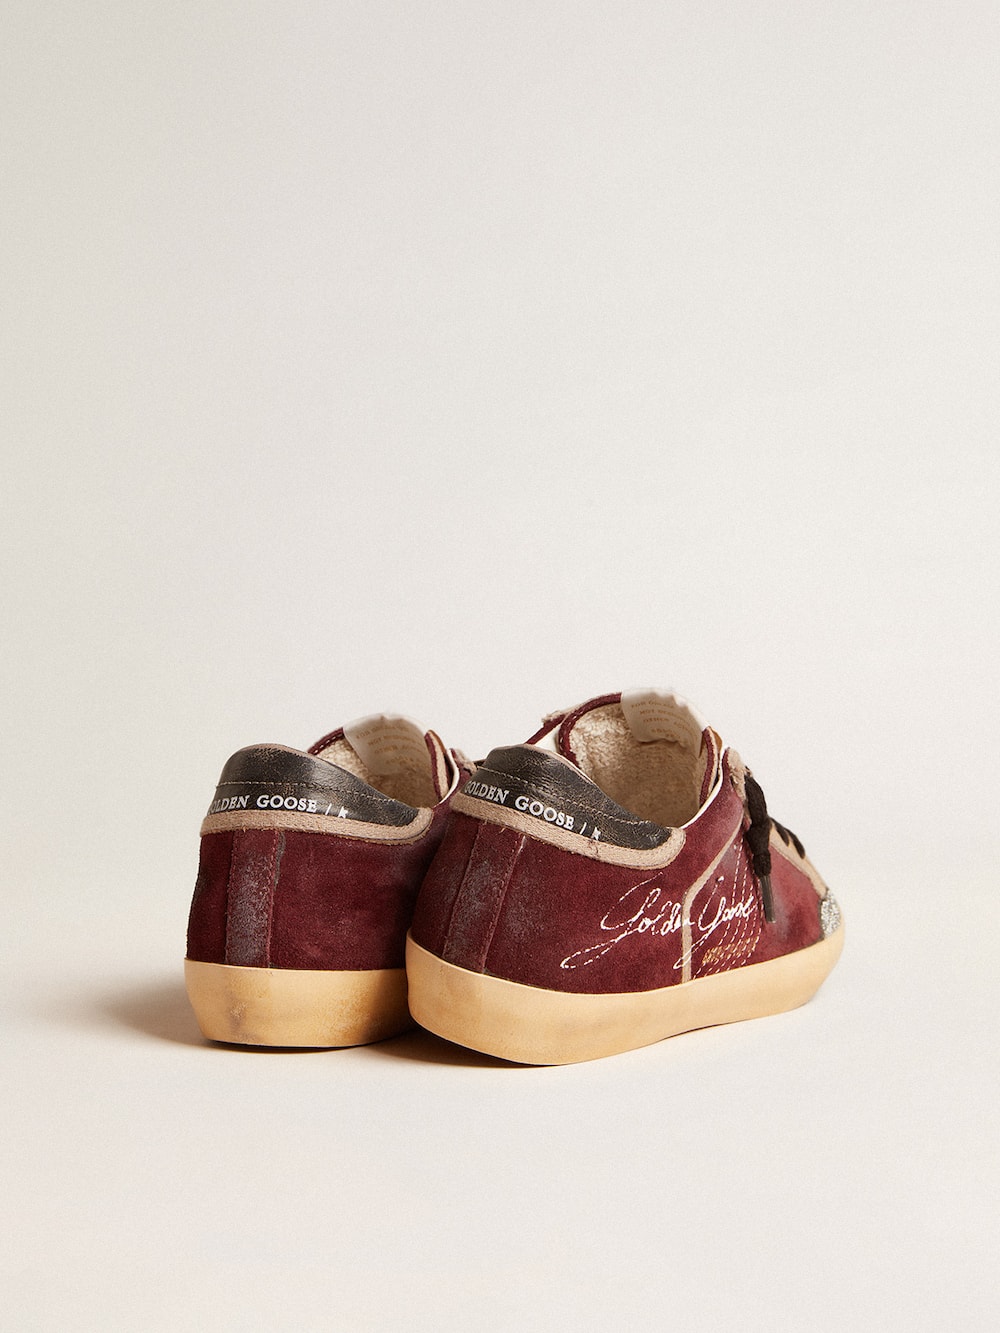 Golden Goose - Men’s Super-Star Penstar LAB in burgundy suede with perforated star in 